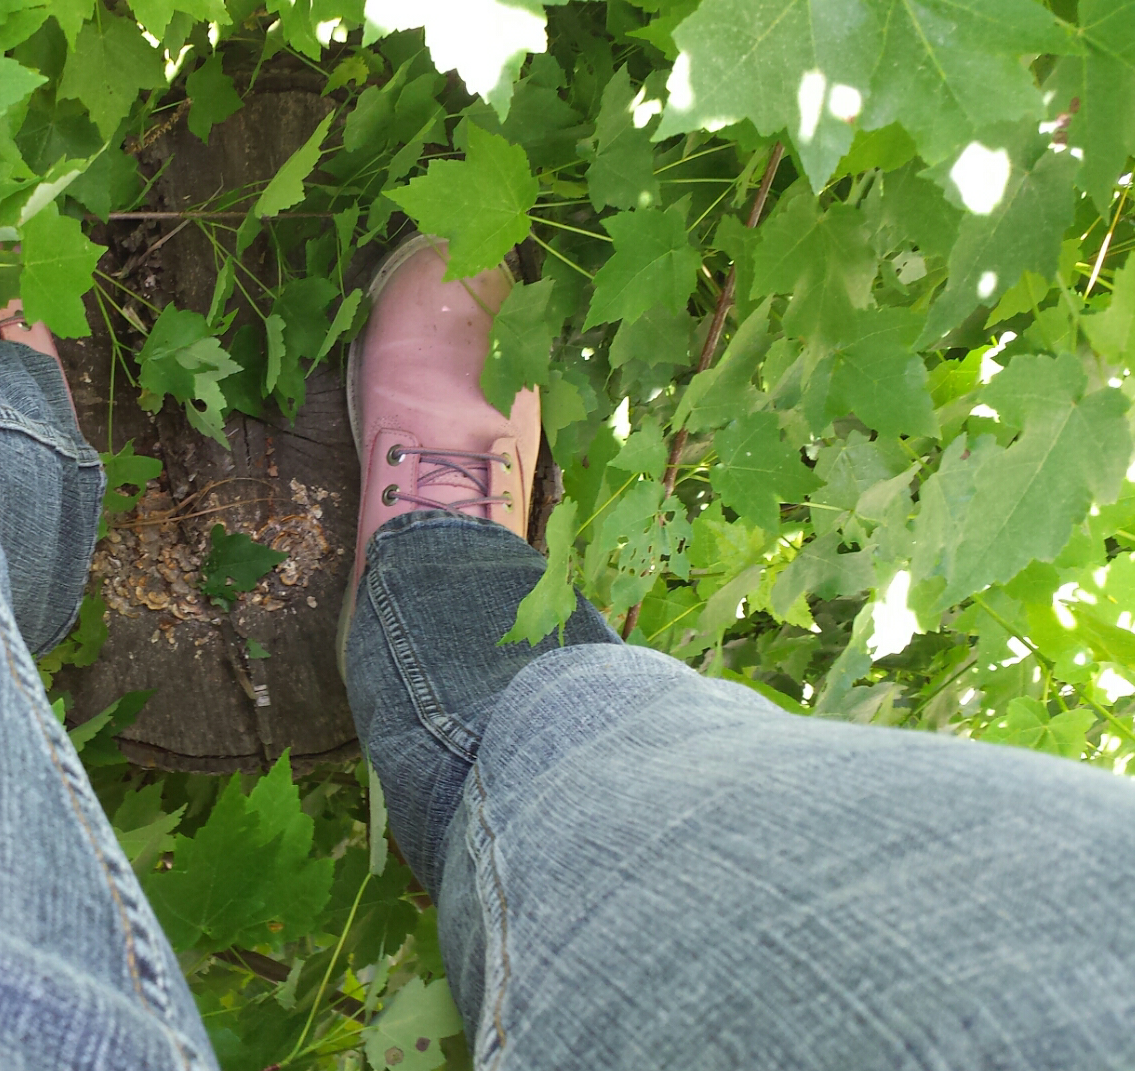 Pink workboot, blue jeans, and a tree top